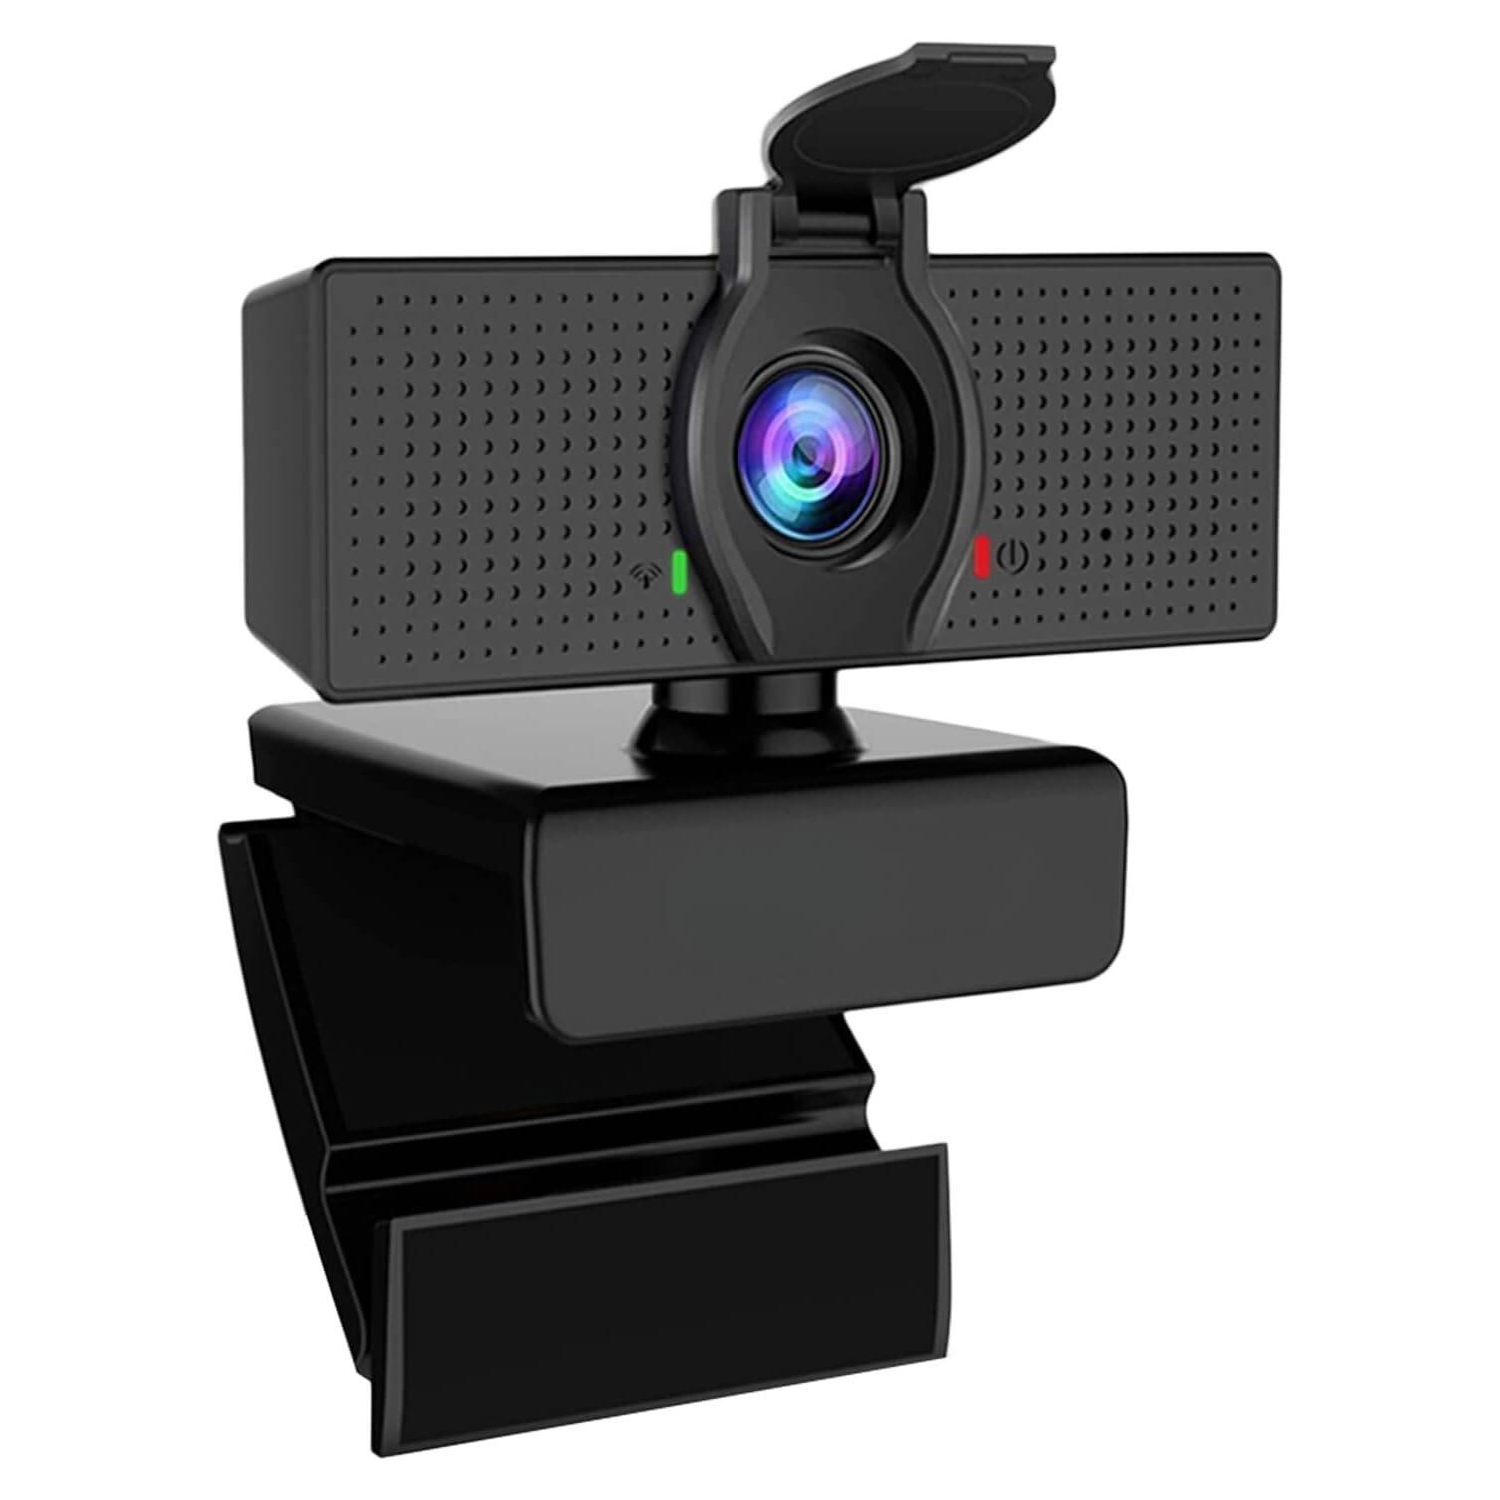 1080P Webcam with Microphone, Software Control & Privacy Cover, USB HD Computer Web Camera, Plug and Play, for Conferencing and Calling, Zoom/Skype/Teams